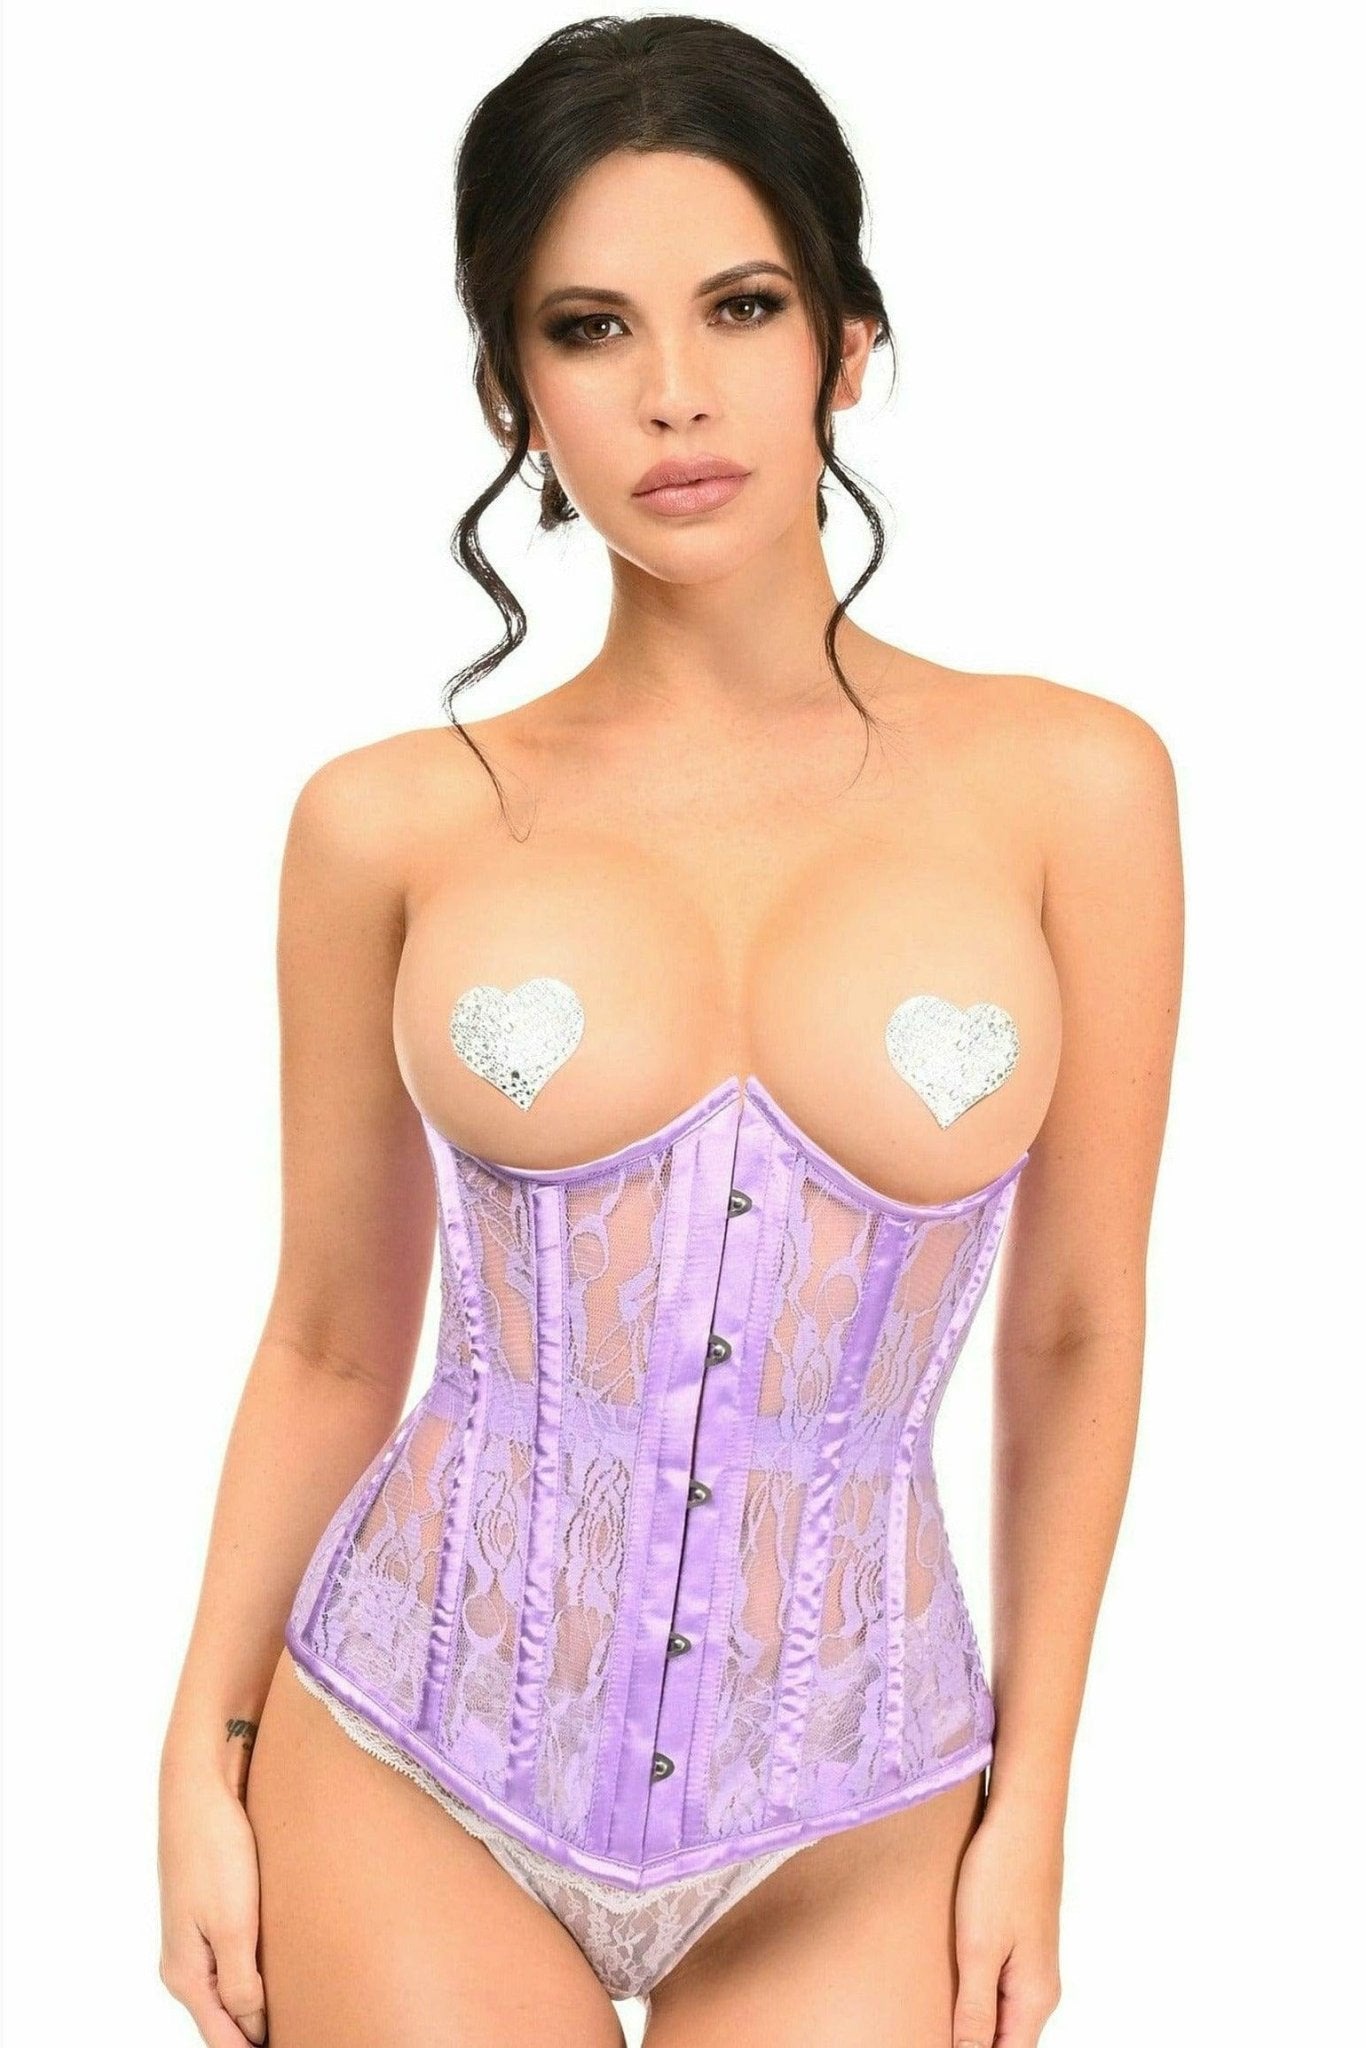 Sexy Lavender Sheer Lace Underwire Open Cup Underbust Corset Musotica.com